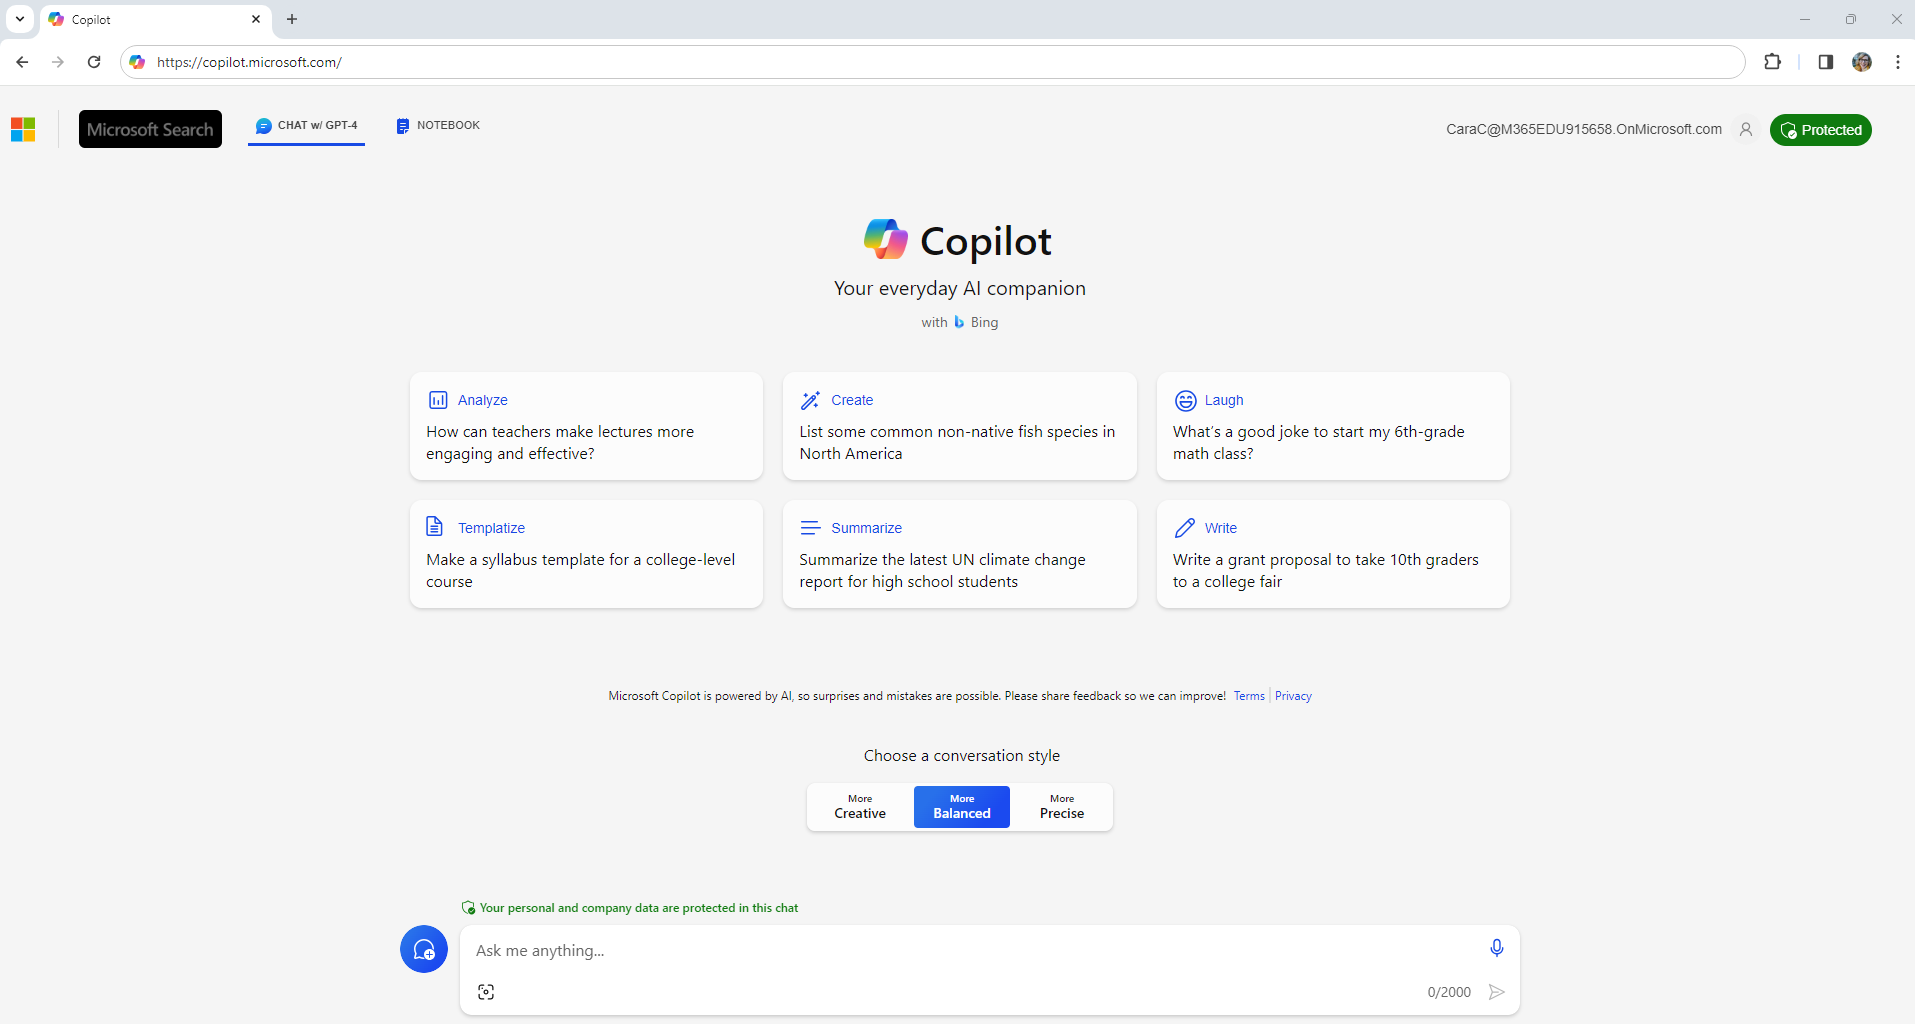 The landing page for copilot.microsoft.com showing suggested prompts for educators, including “How can teachers make lectures more engaging and effective,” and several more.